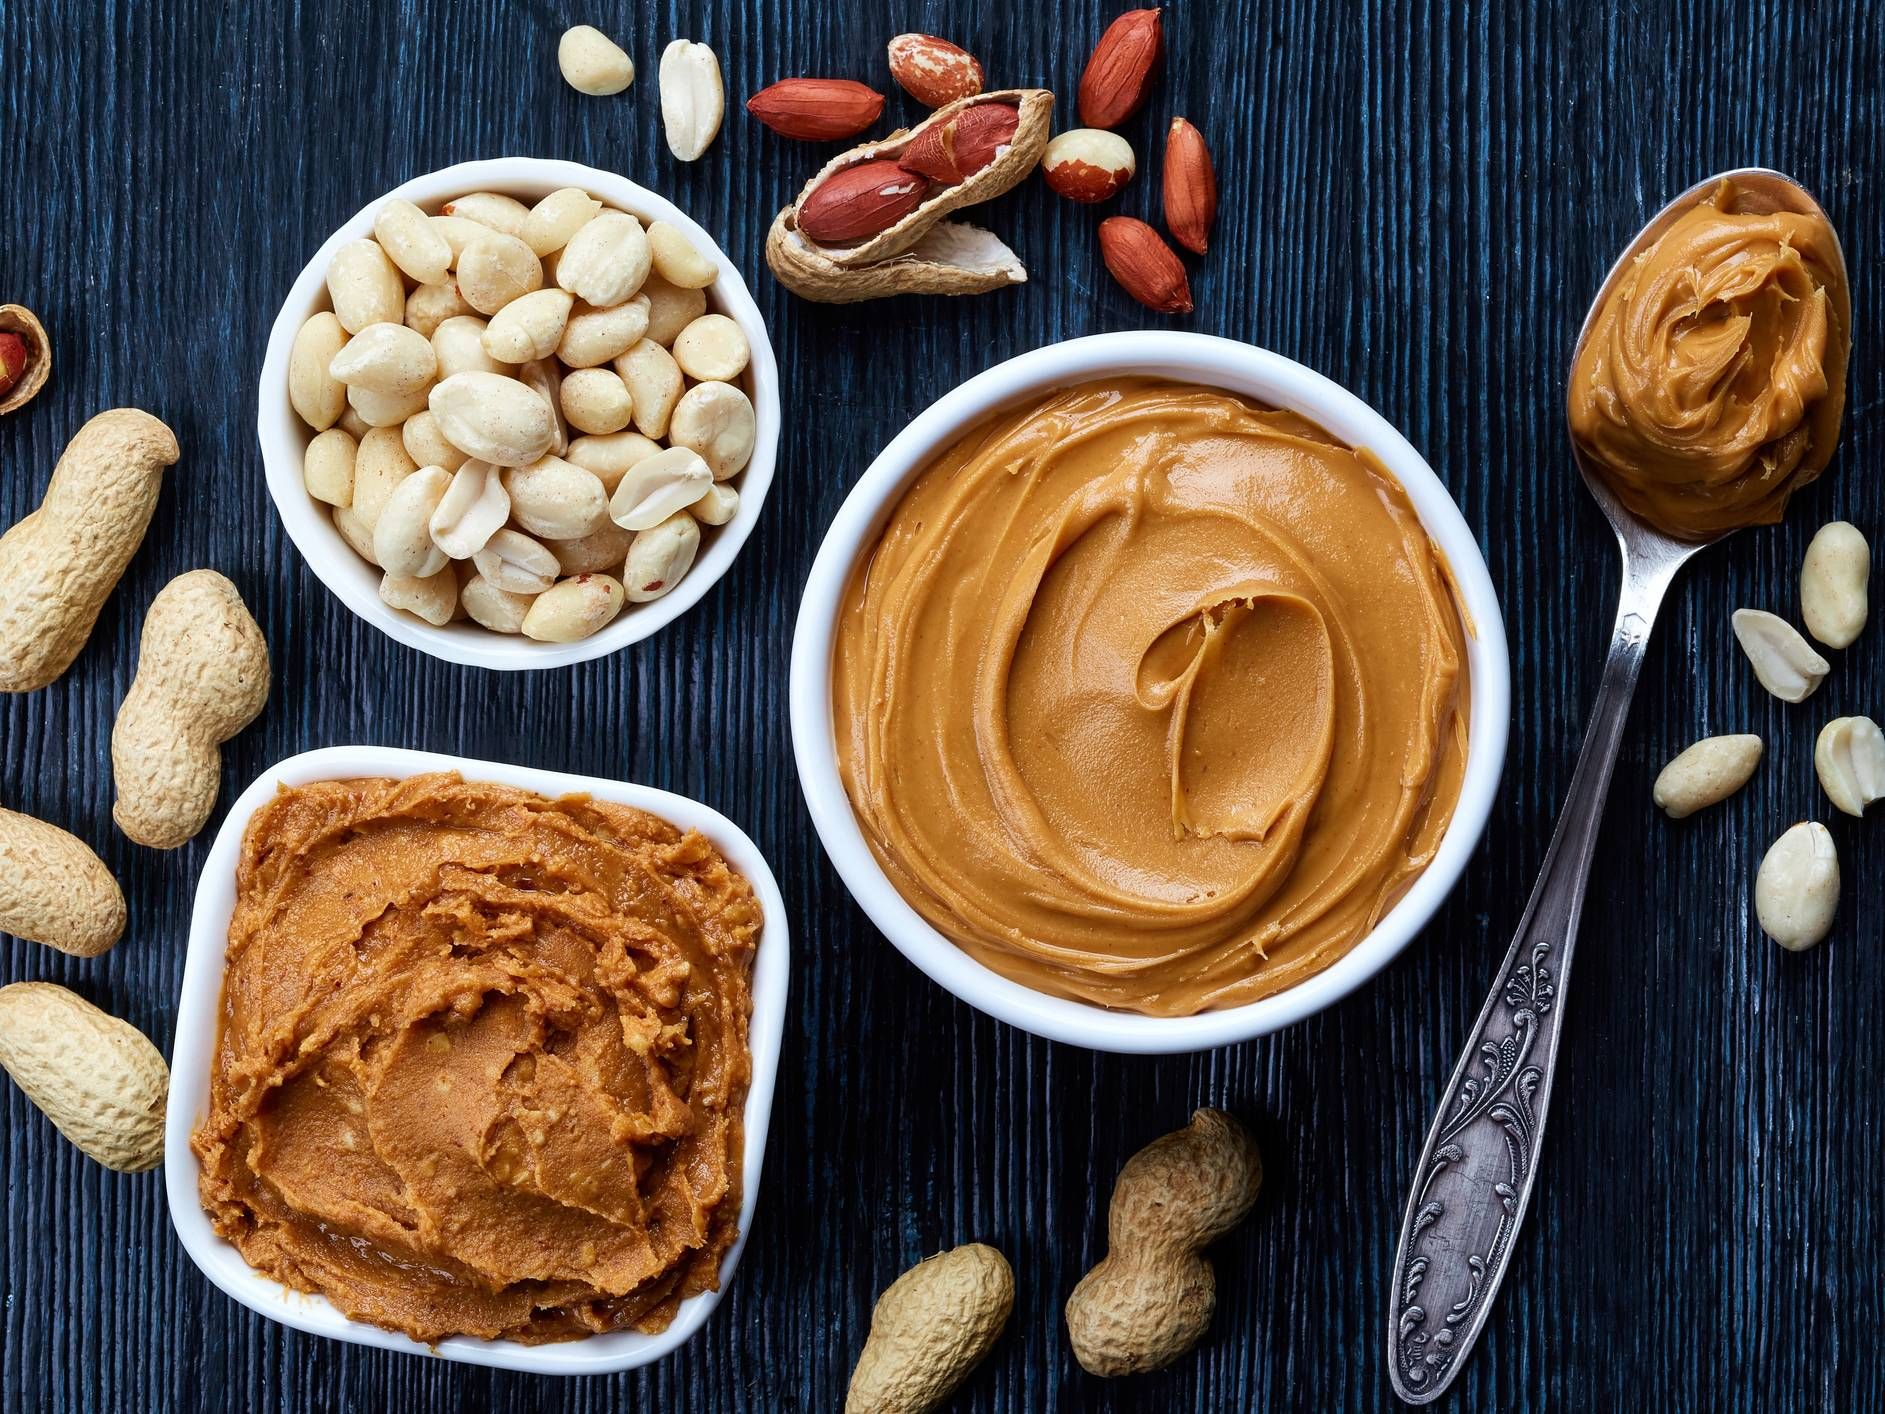 There are so many different nut and seed butters out there. Which one is right for you?